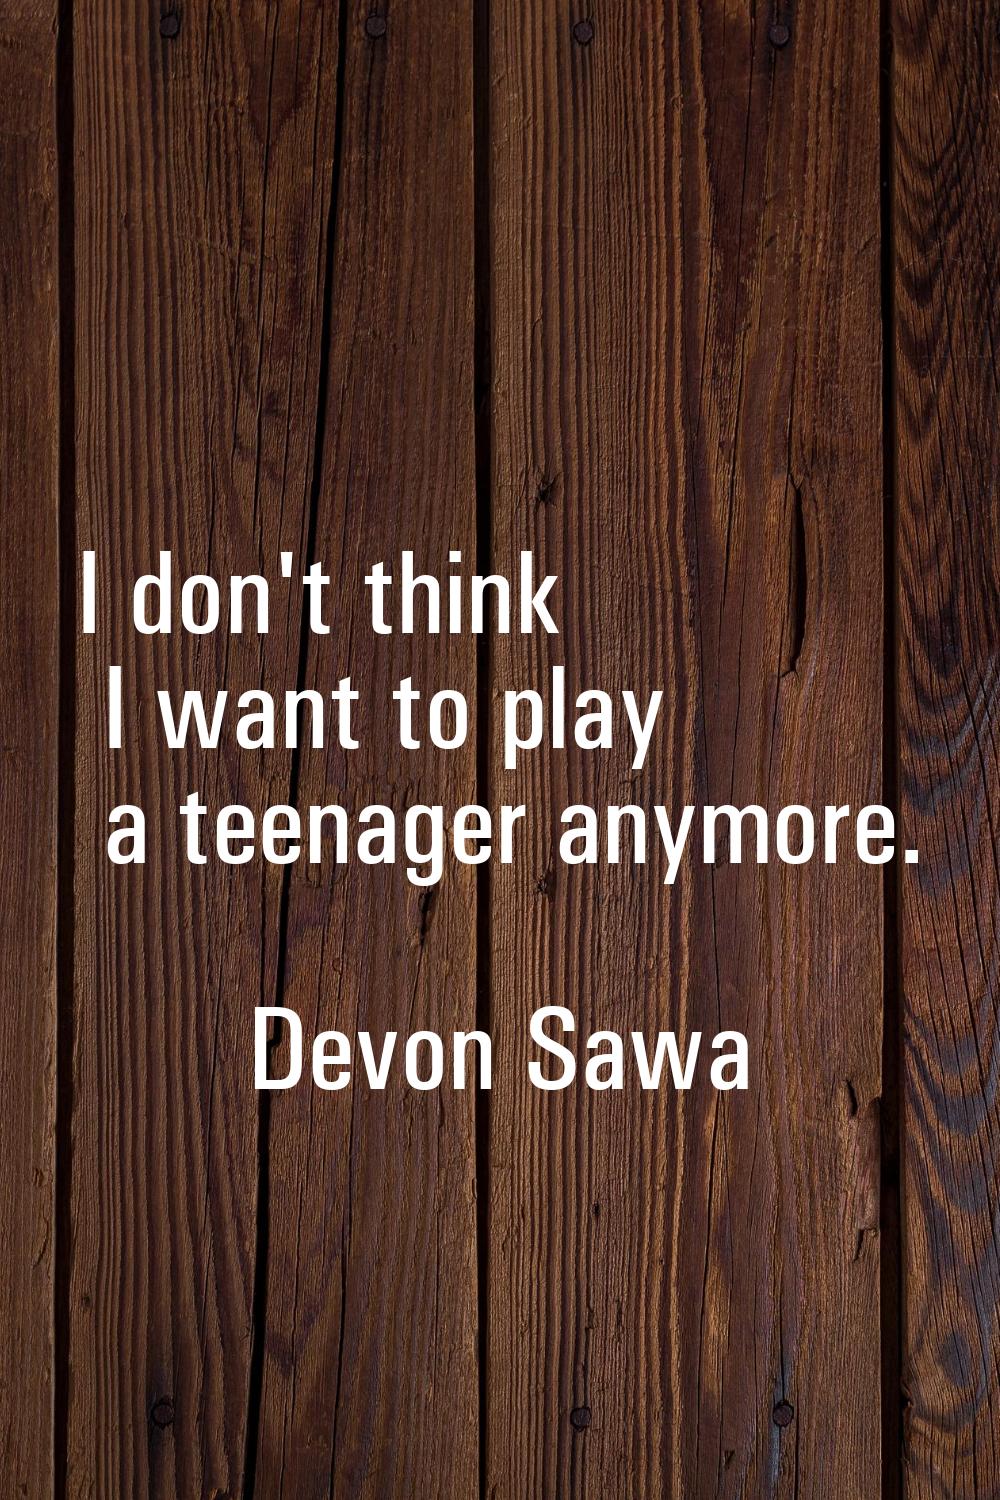 I don't think I want to play a teenager anymore.